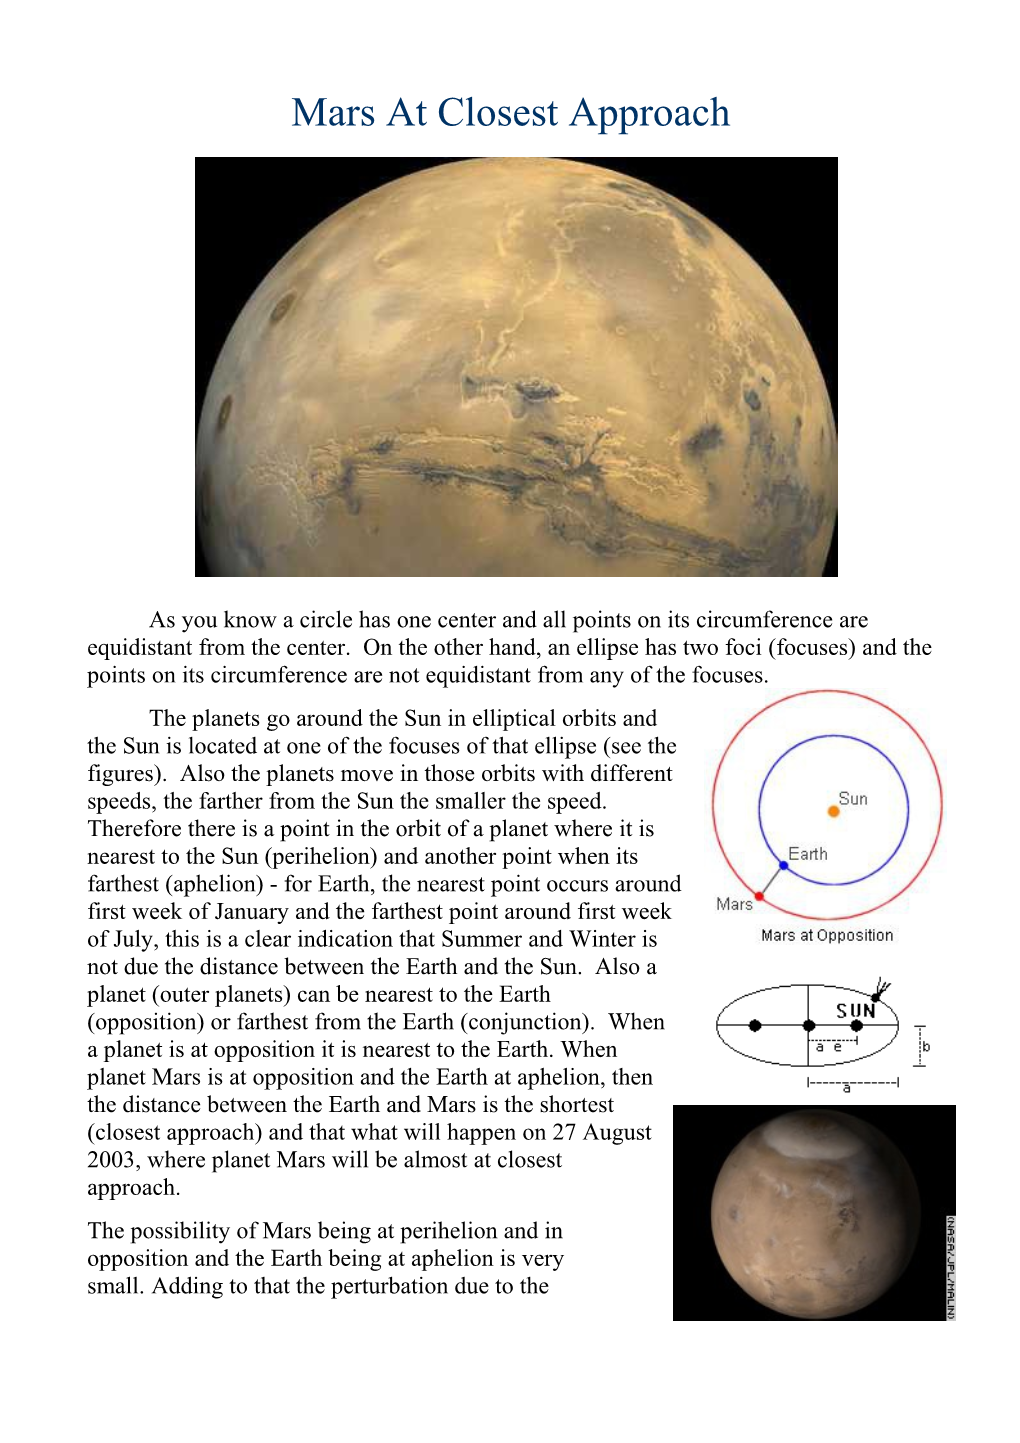 Mars at Closest Approach